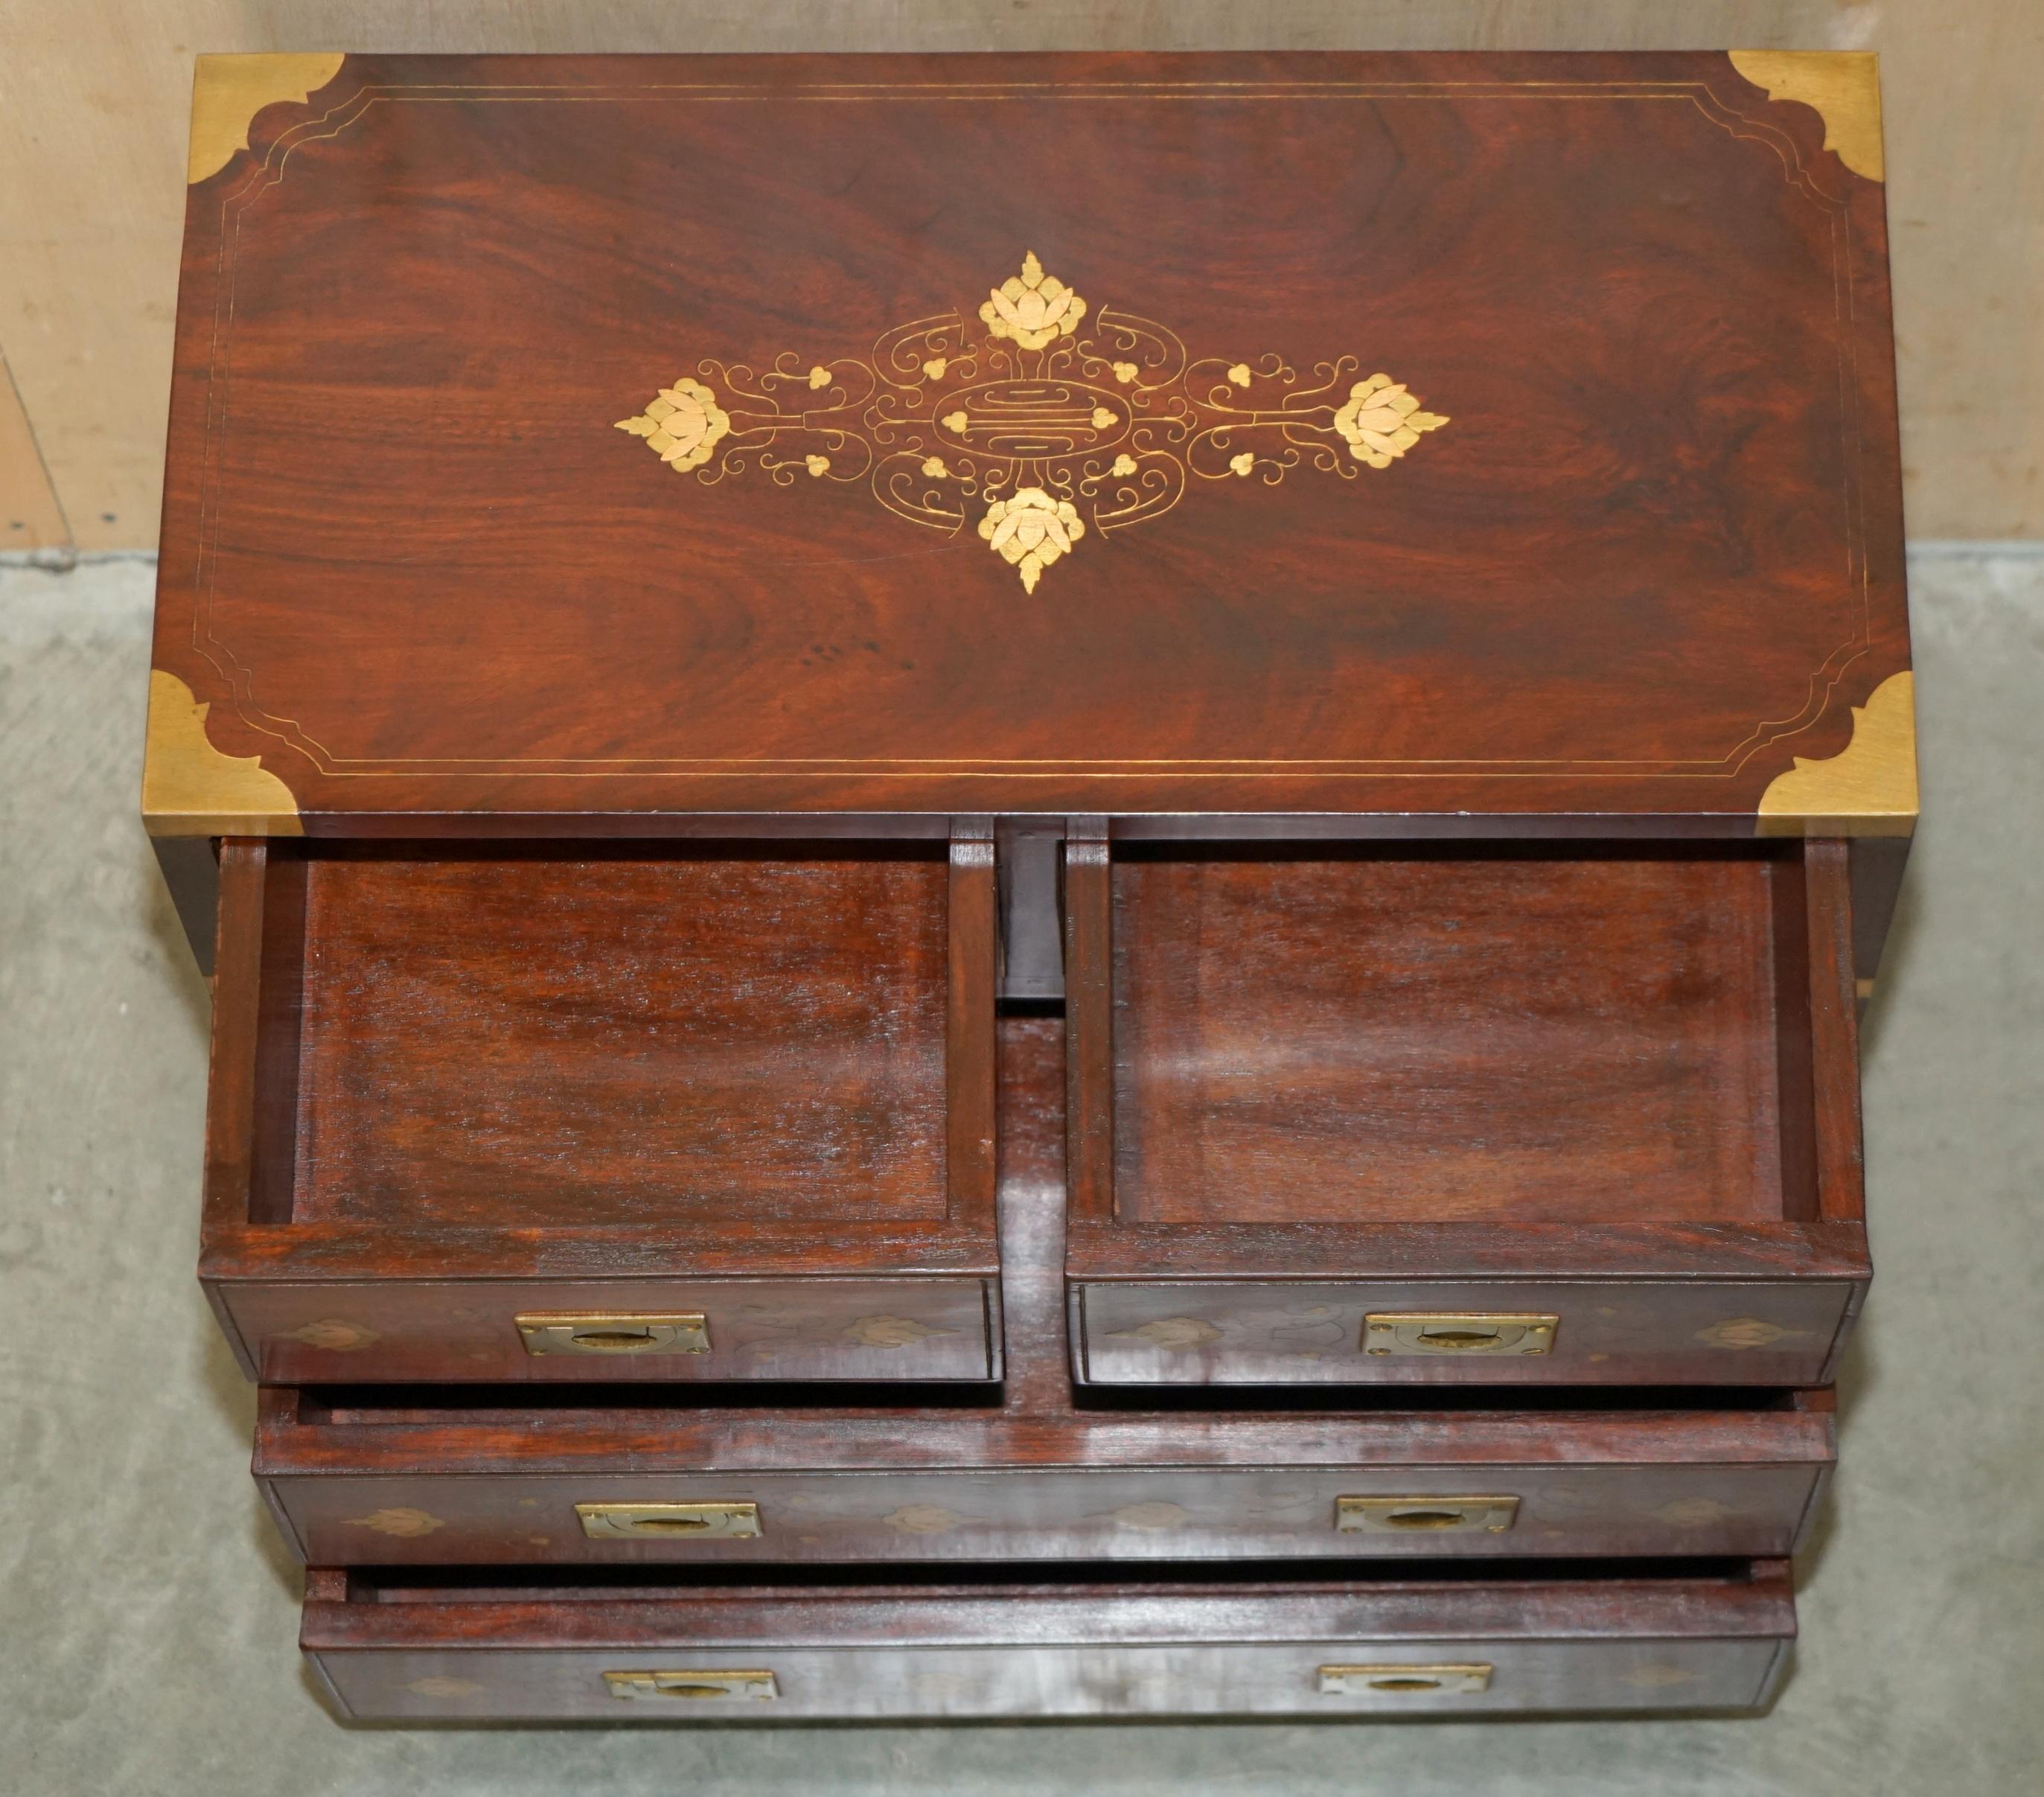 ANTIQUE 1920 HARDWOOD & BRASS INLAID CAMPAIGN CHEST OF DRAWERS SiDE TABLE SIZED 11